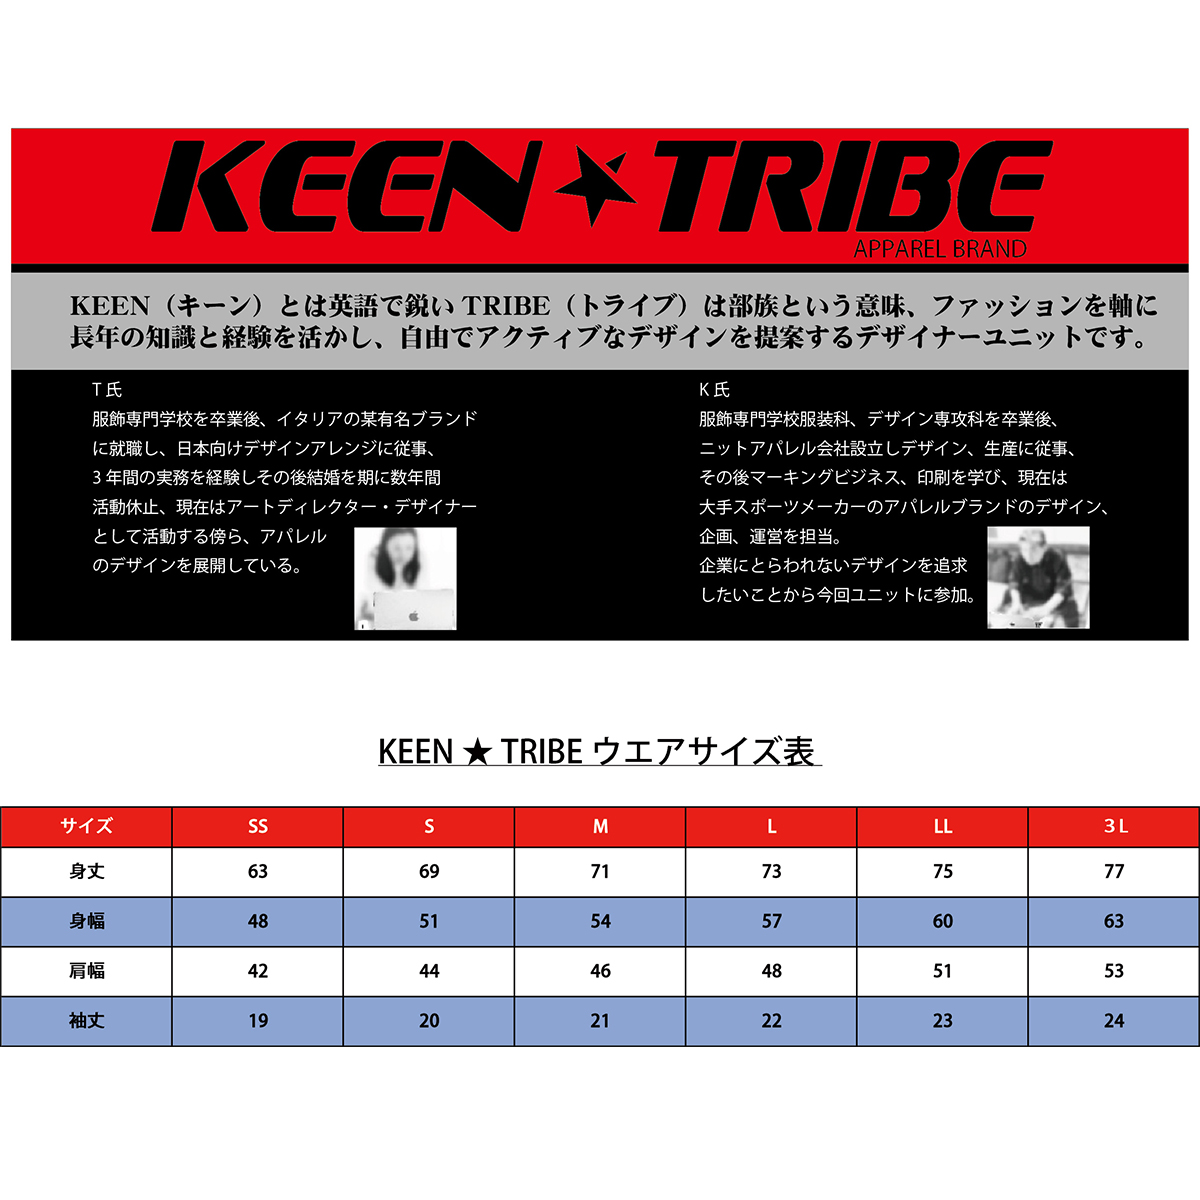 KEEN ★ TRIBE　KT-51(受注生産)